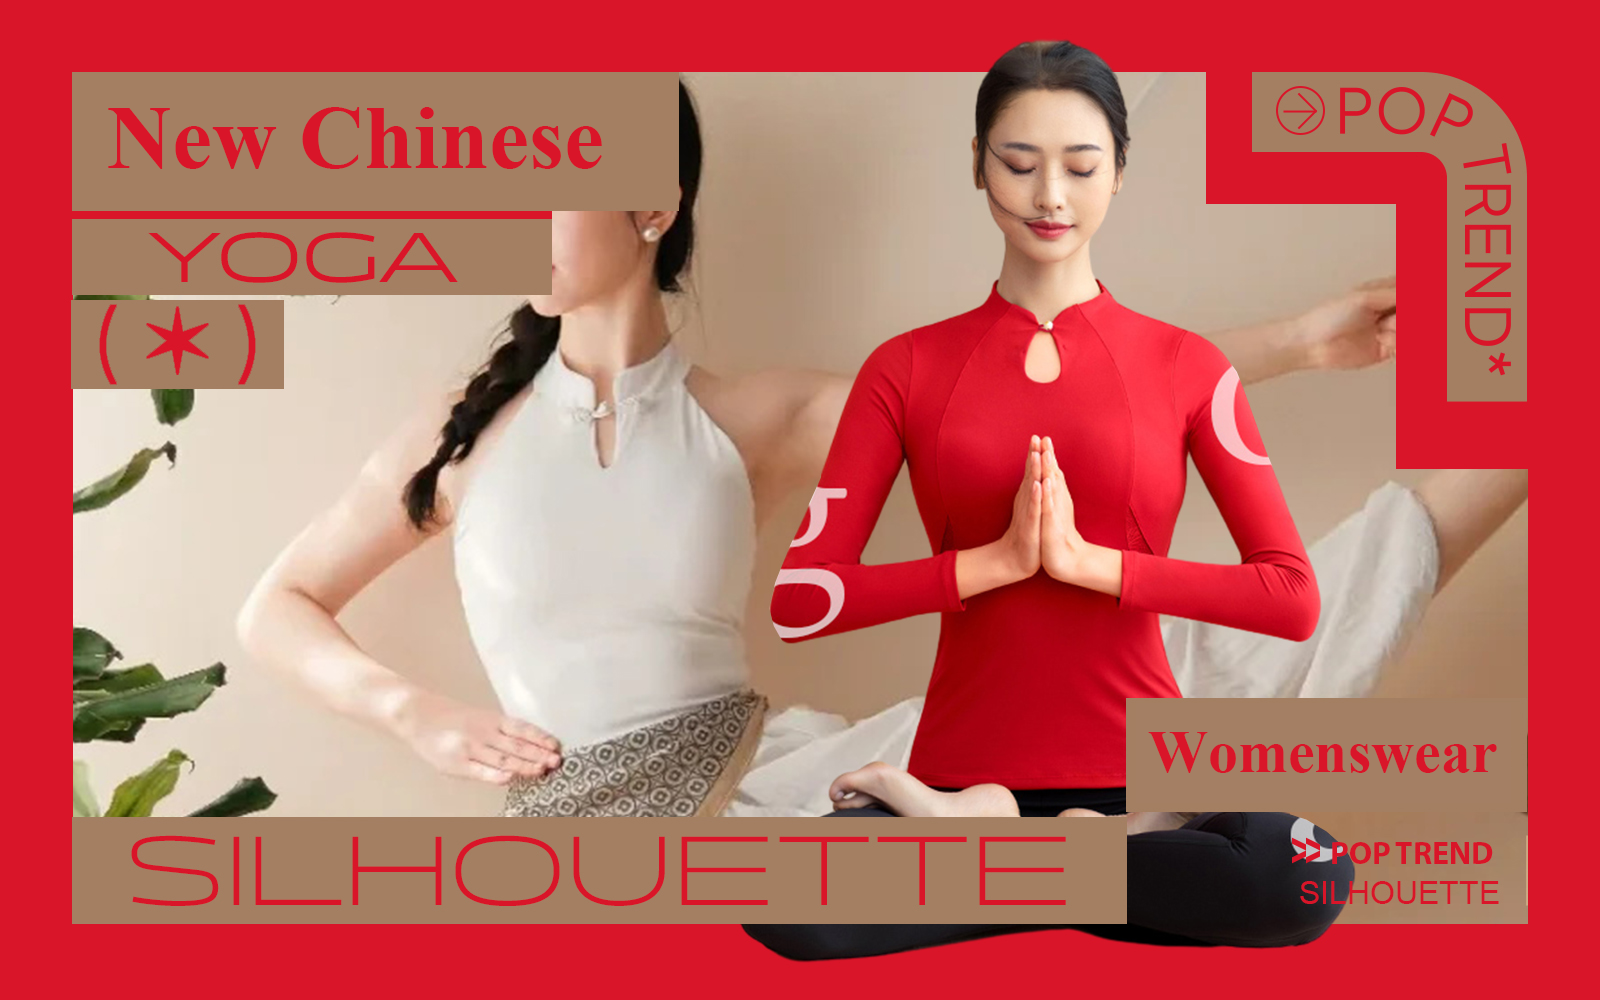 New Chinese Yoga -- The Item Trend for Women's Yogawear